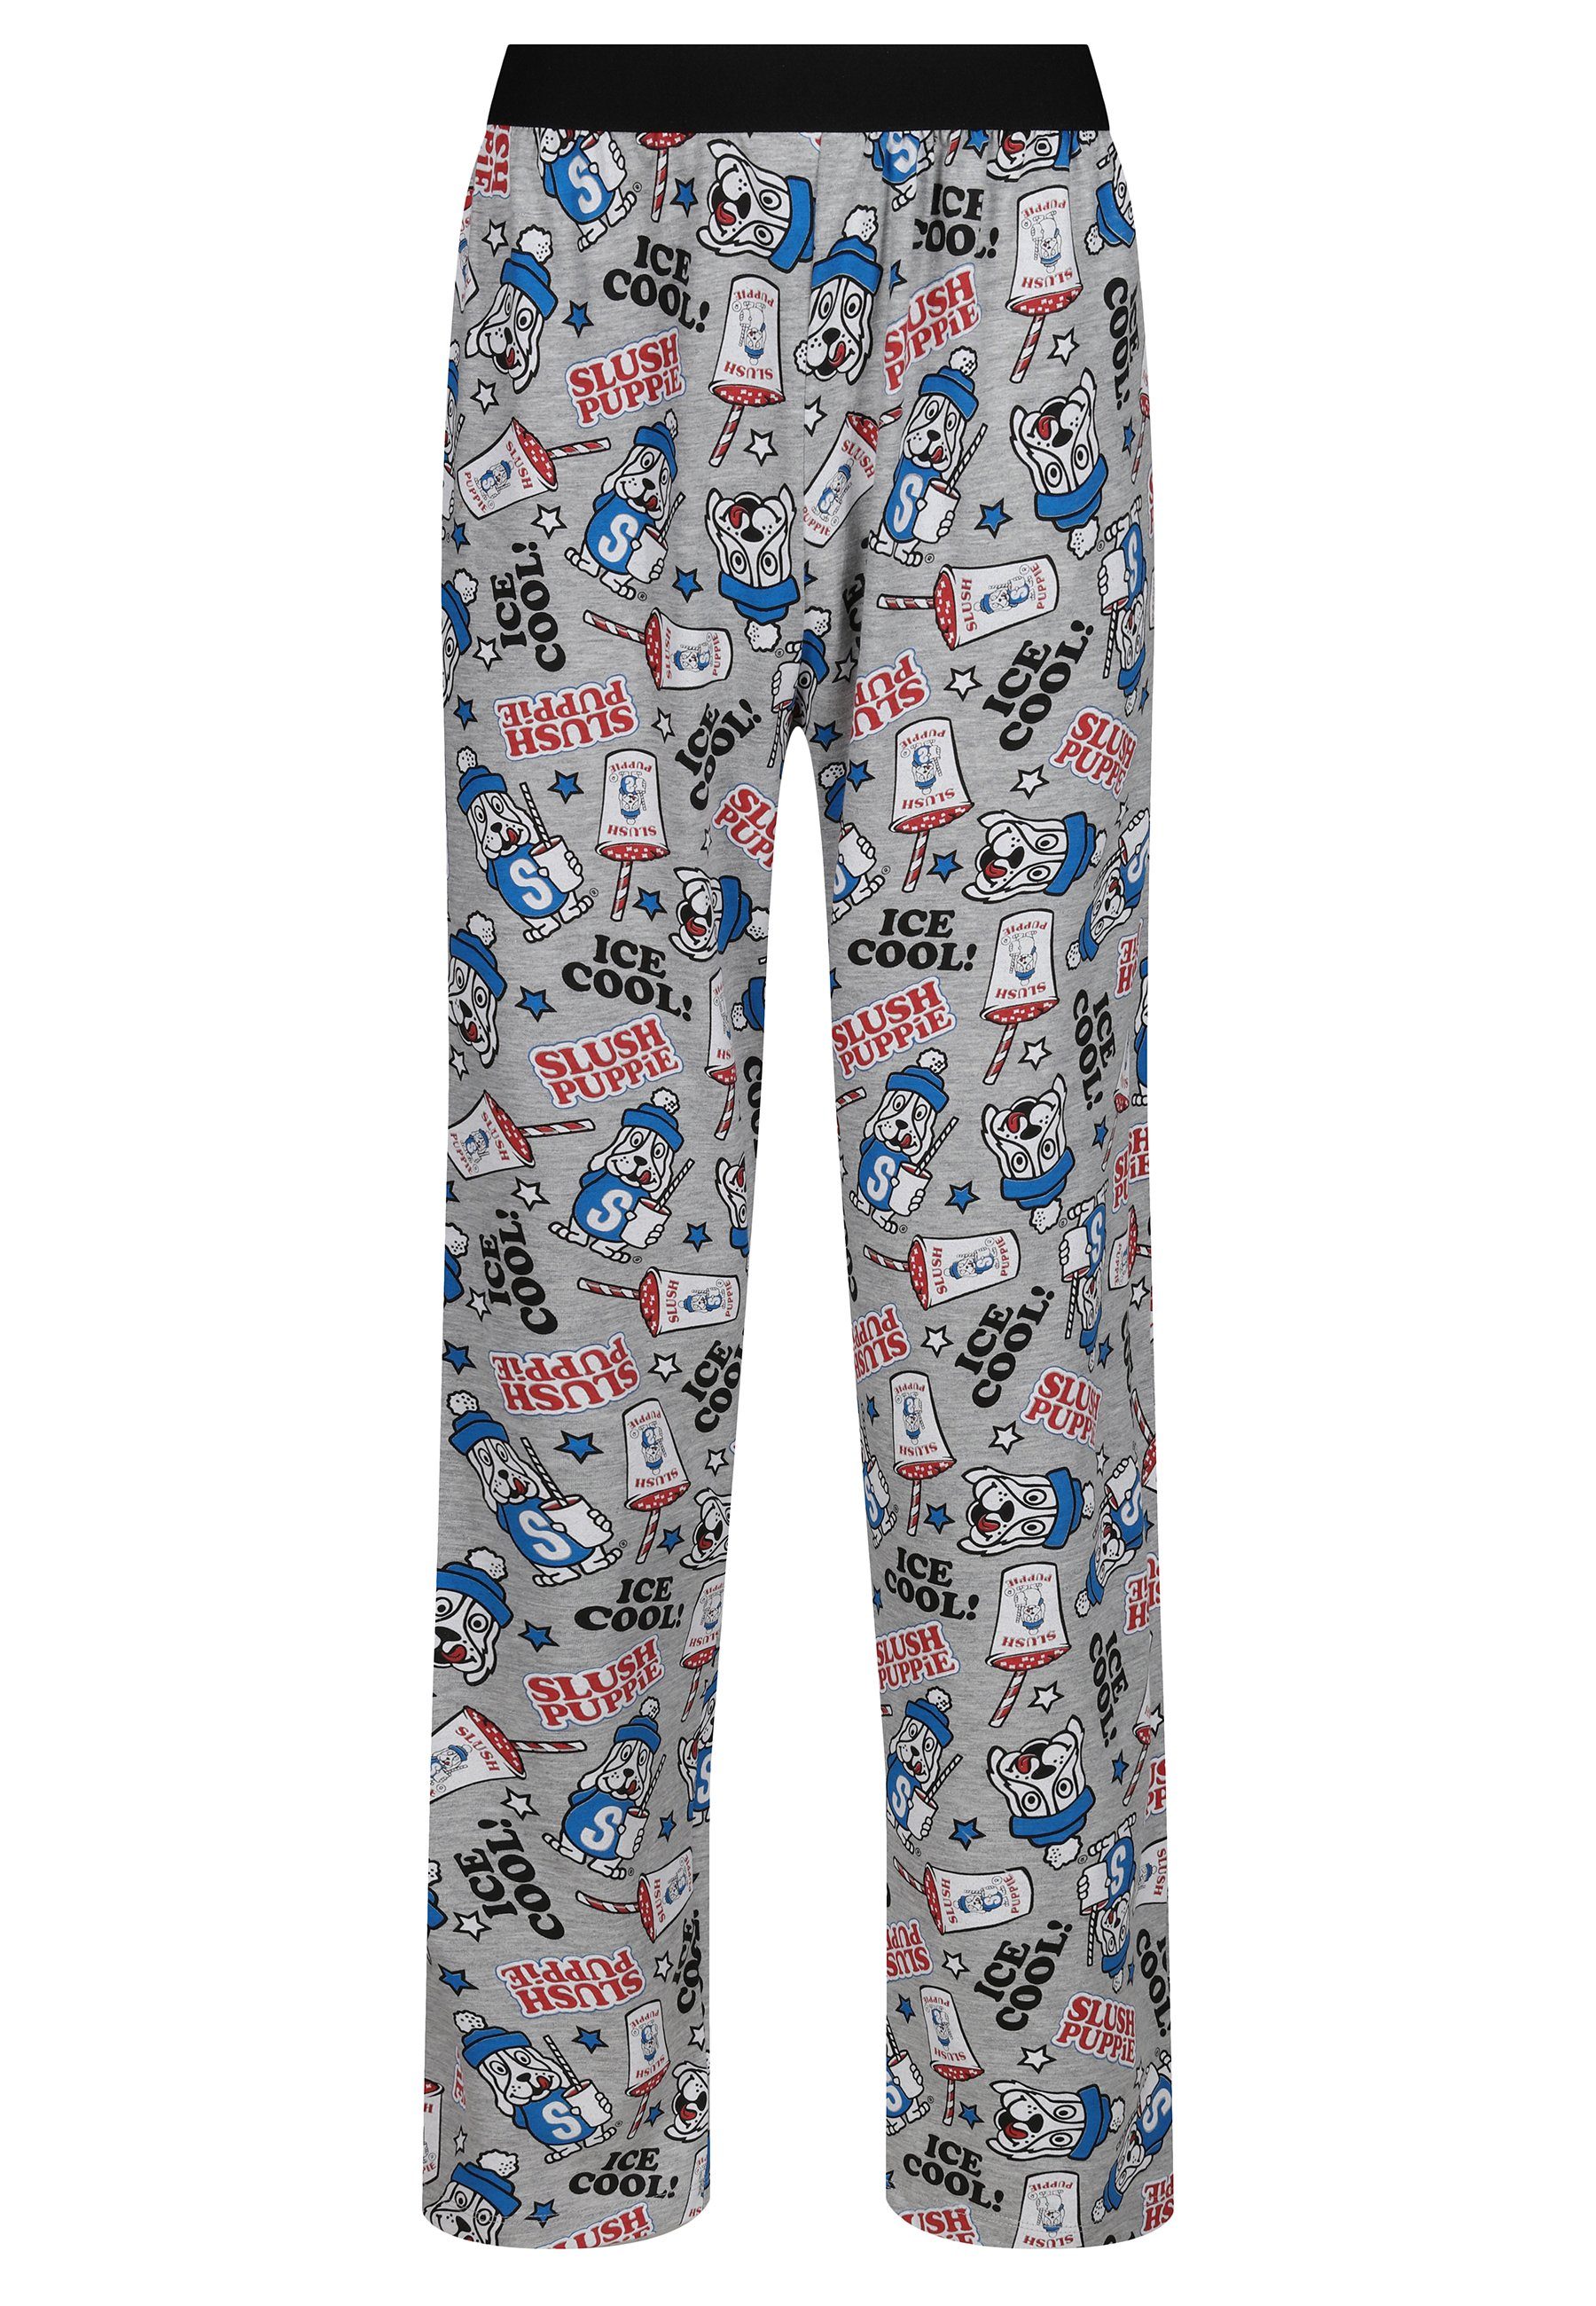 Recovered Loungepants Loungepants - Slush Puppie Ice Cool all over print - grey